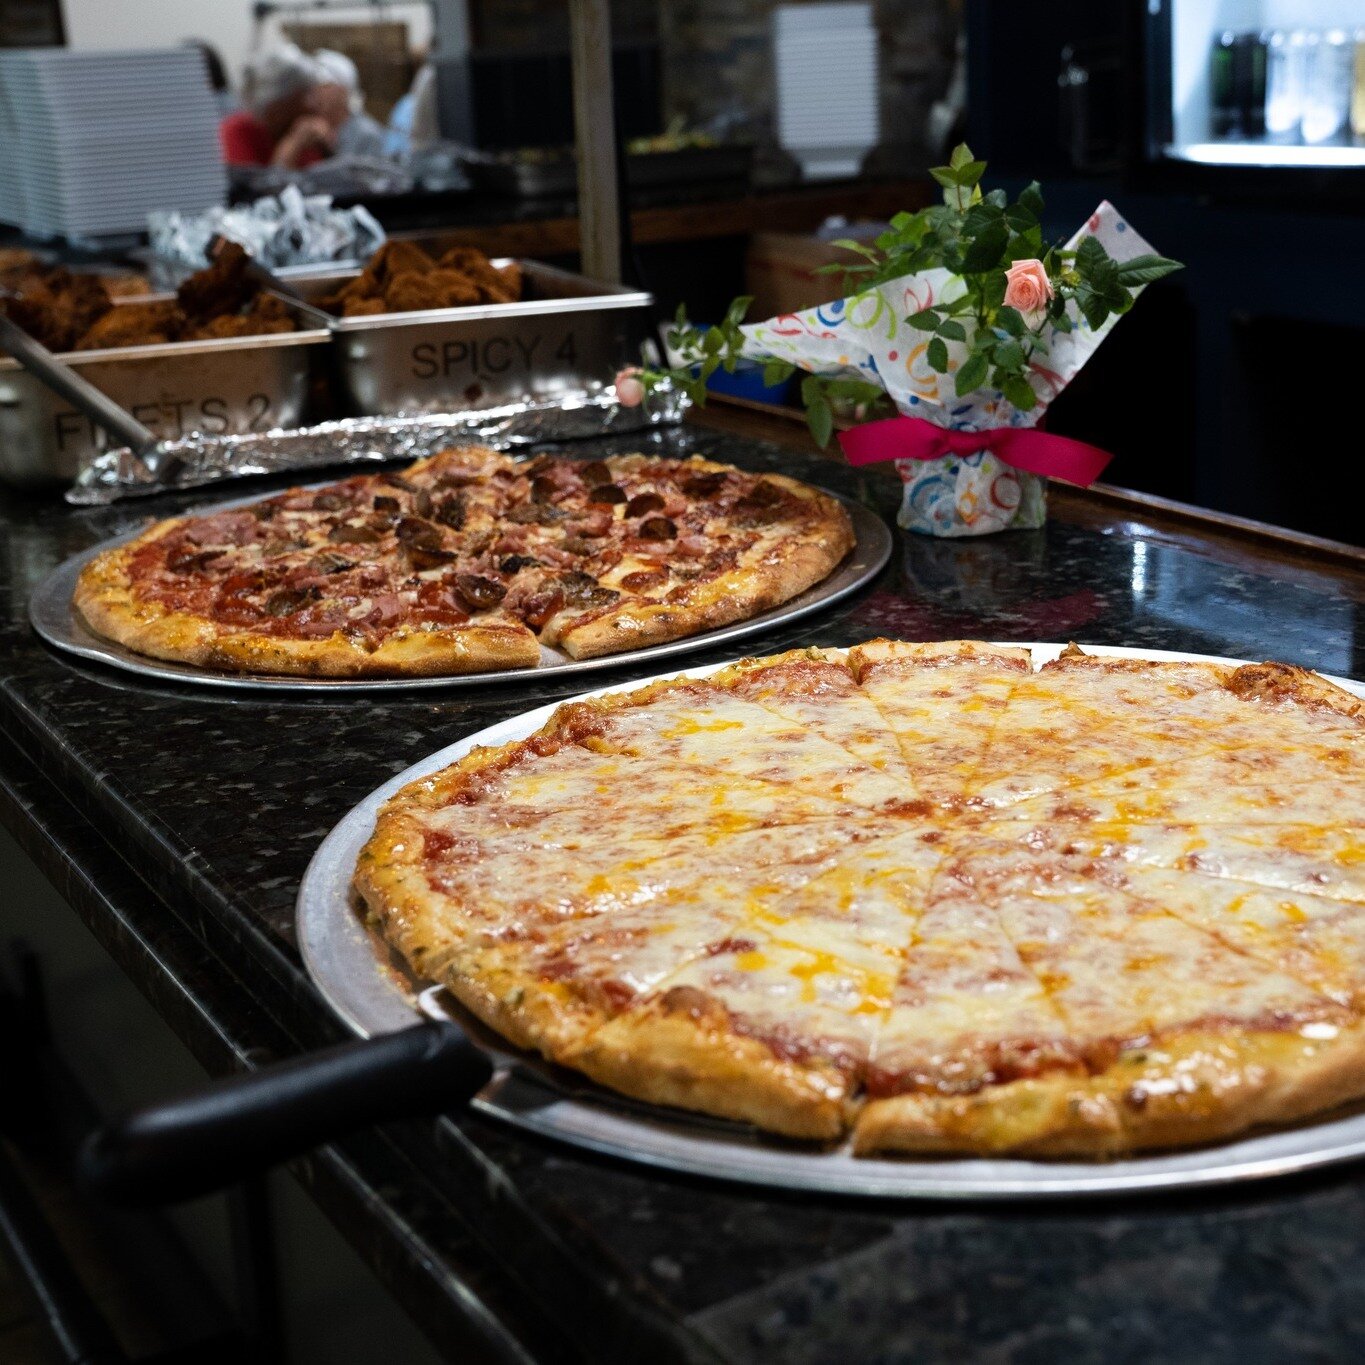 Looking for catering options for your work retreat, church event, or club? 🍕

We cater to the whole city of Lakeland and are locally owned and operated! Let us know how we can serve you!